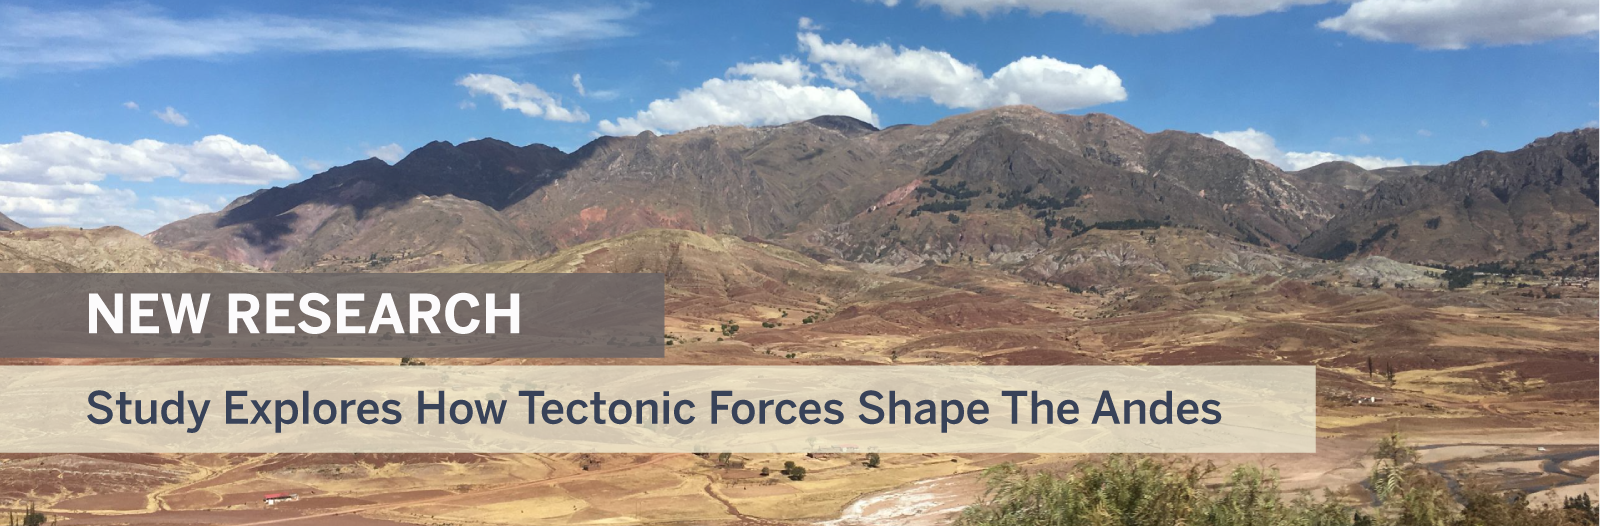 Study Explores How Tectonic Forces Shape The Andes – Banner